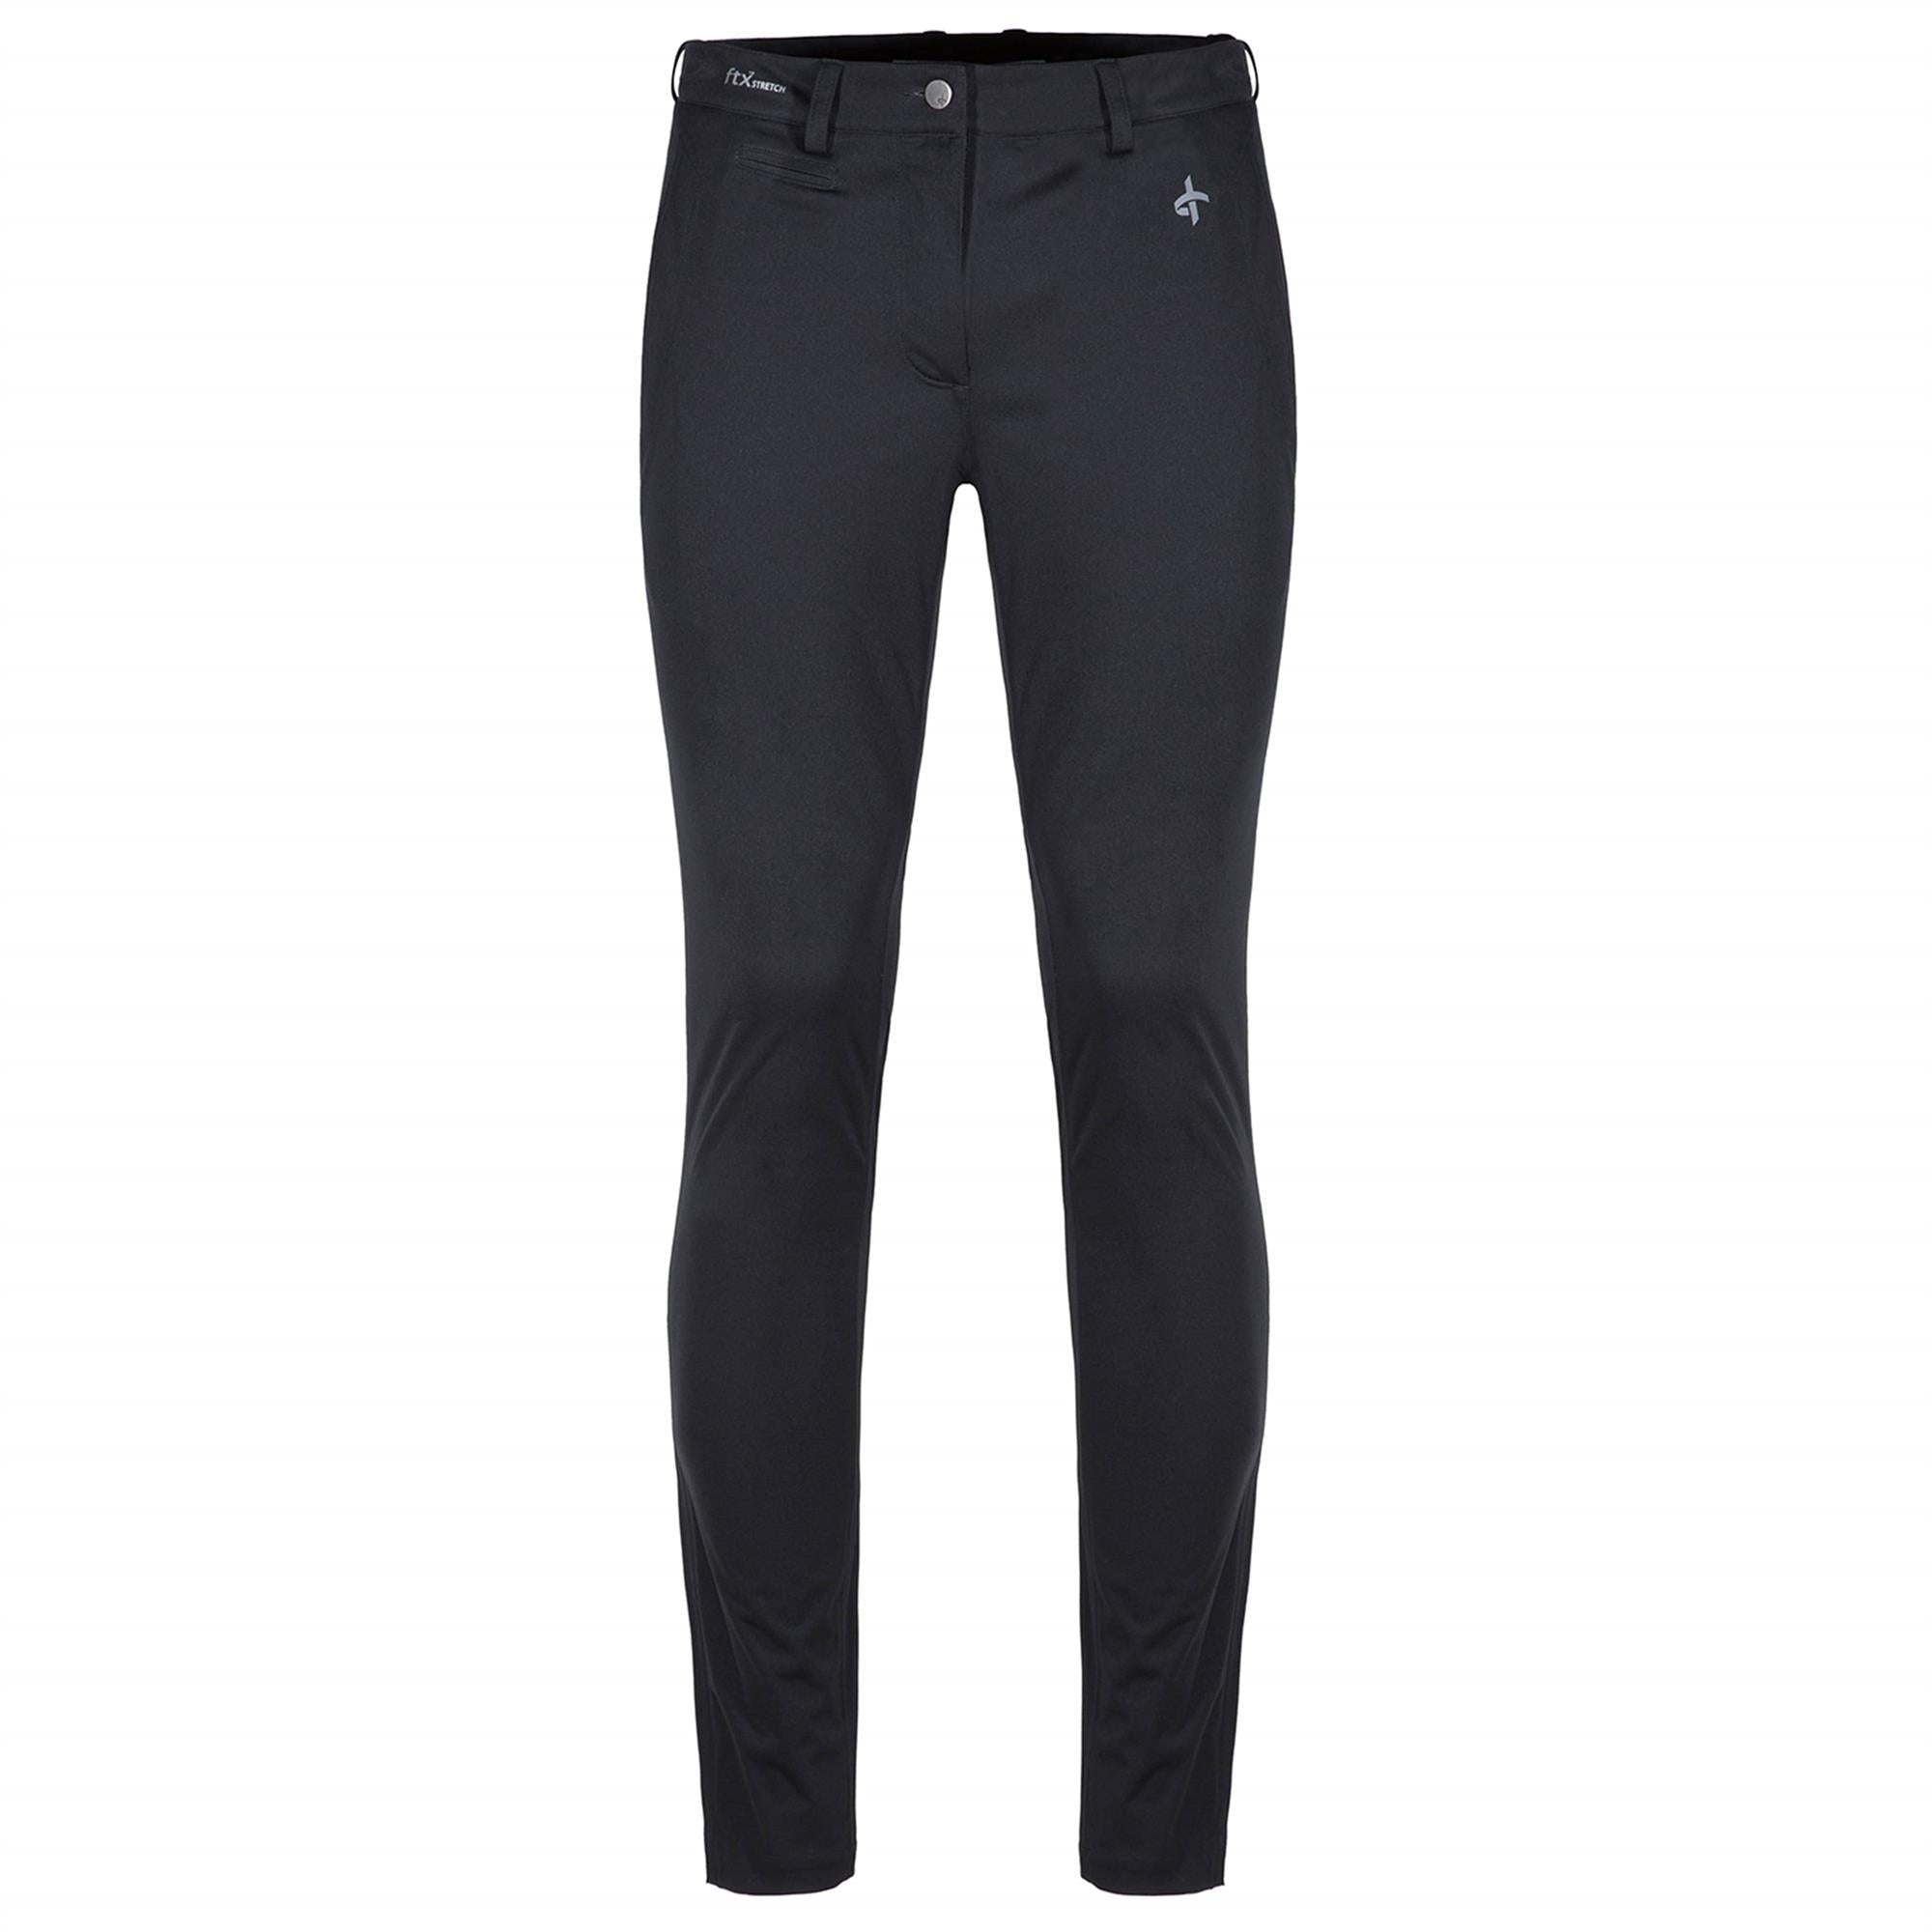 Galvin Green Alana GORE-TEX Ladies Waterproof Trousers From